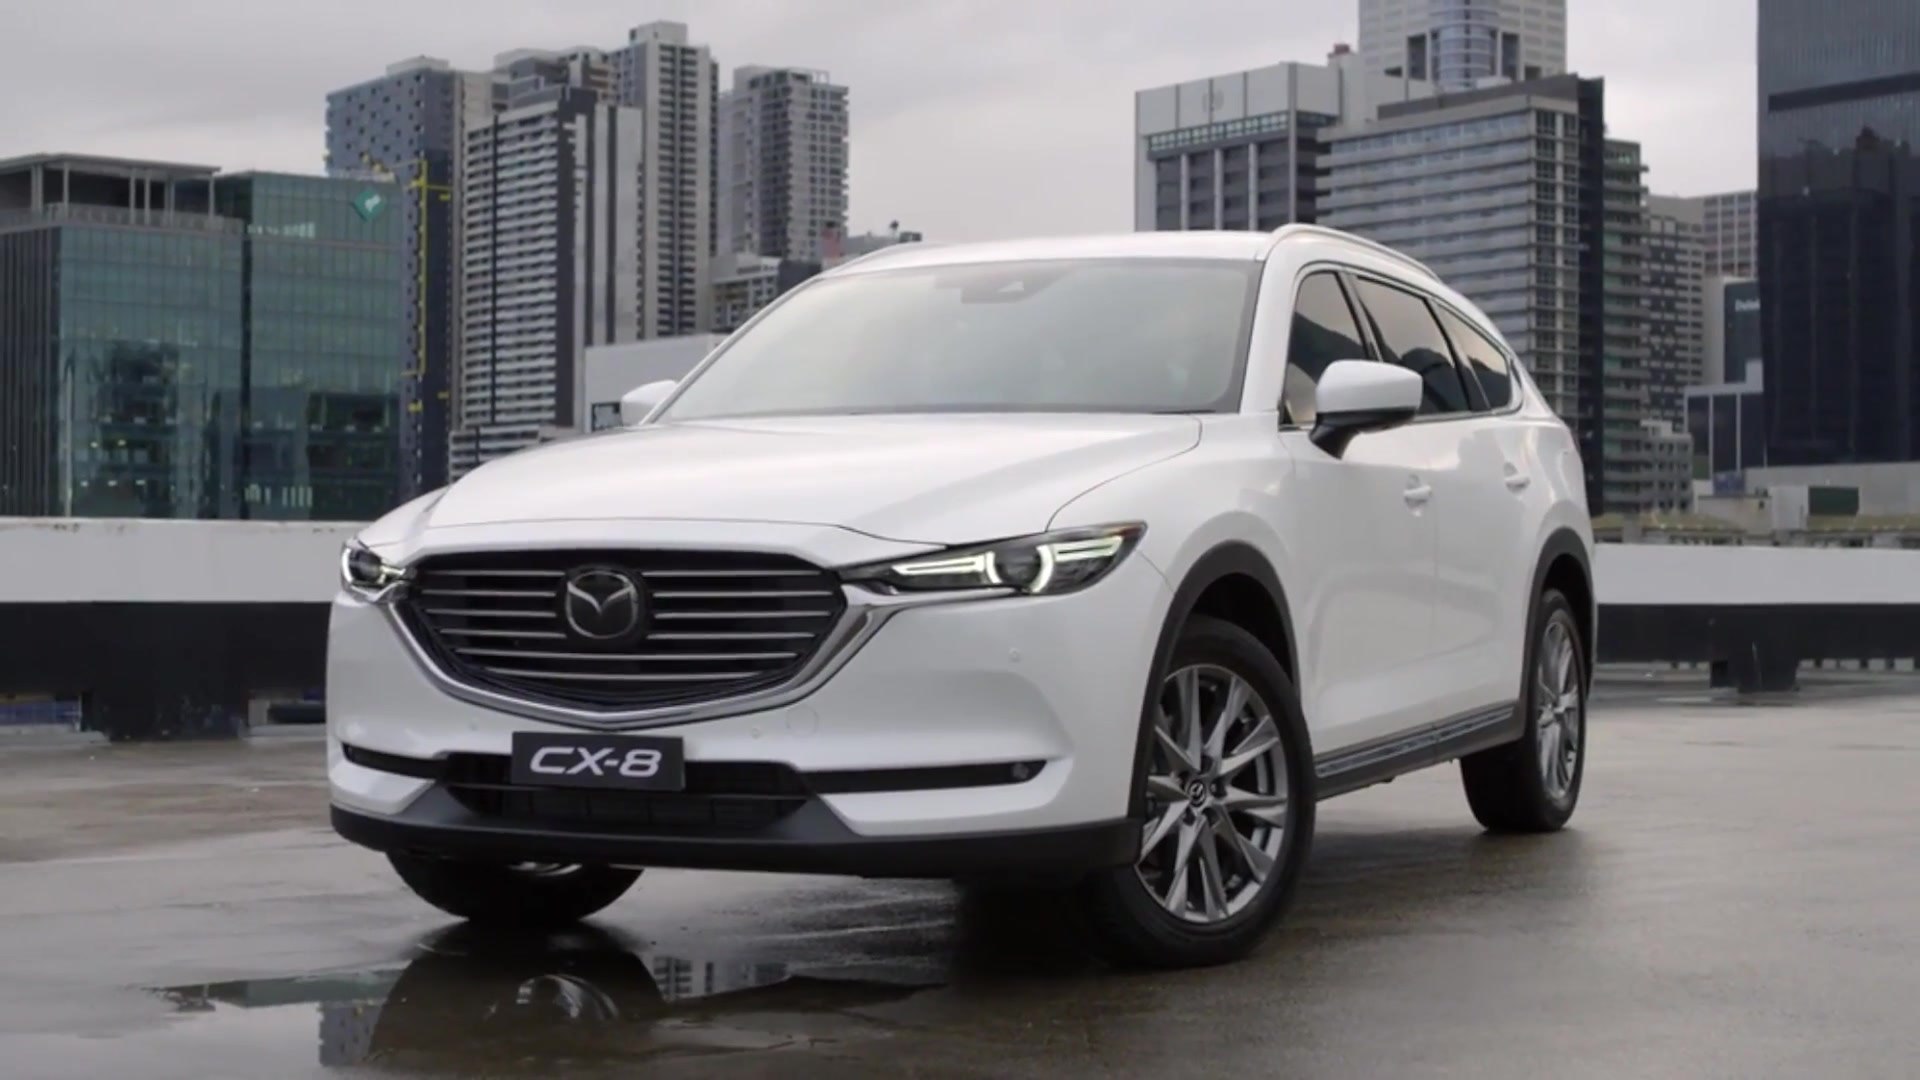 The New Mazda Cx 8 Diesel Exterior Design Video Dailymotion